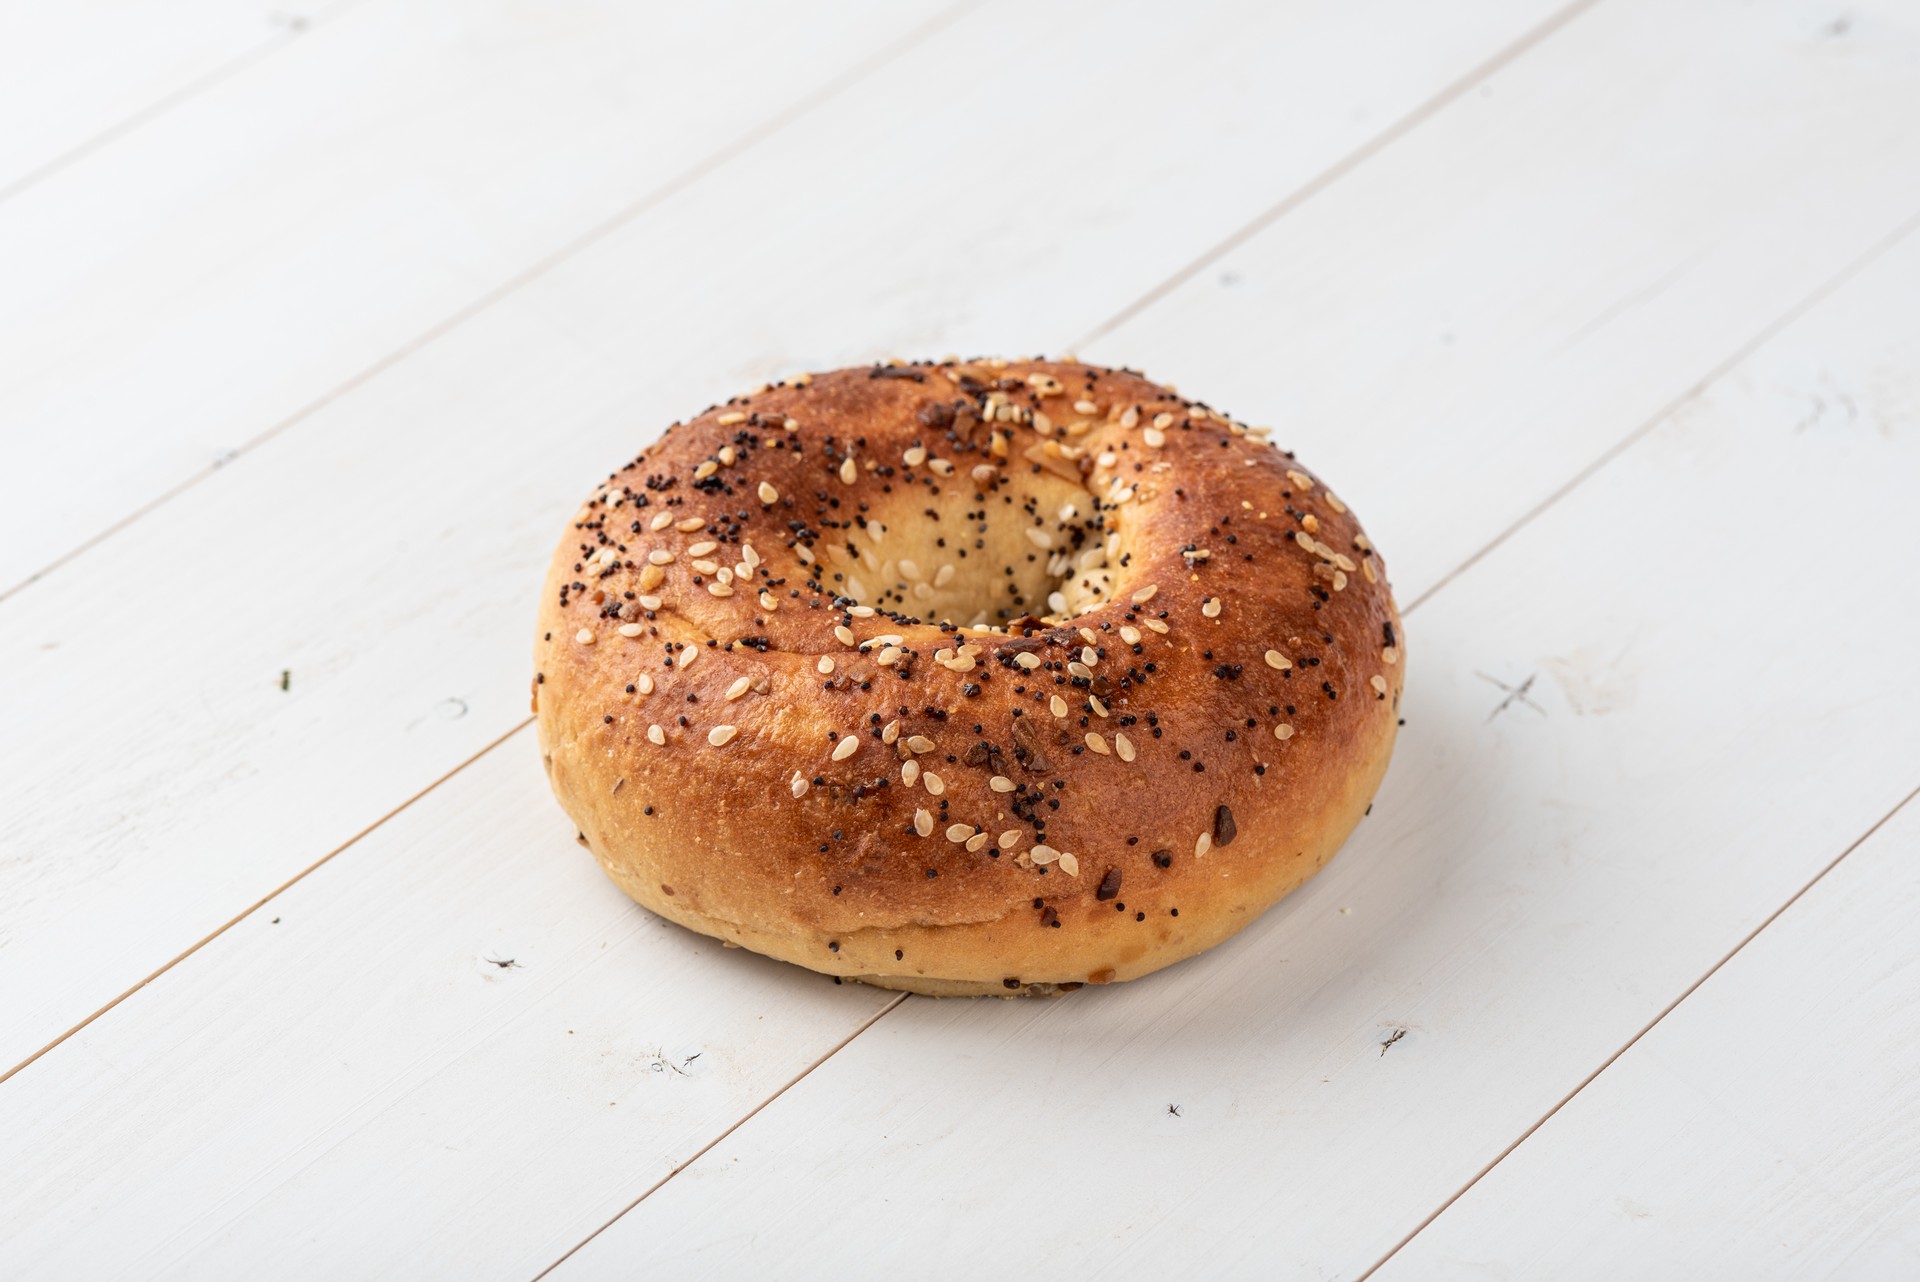 Perfect 10 Maxx Everything Protein Bagel on a wooden board.